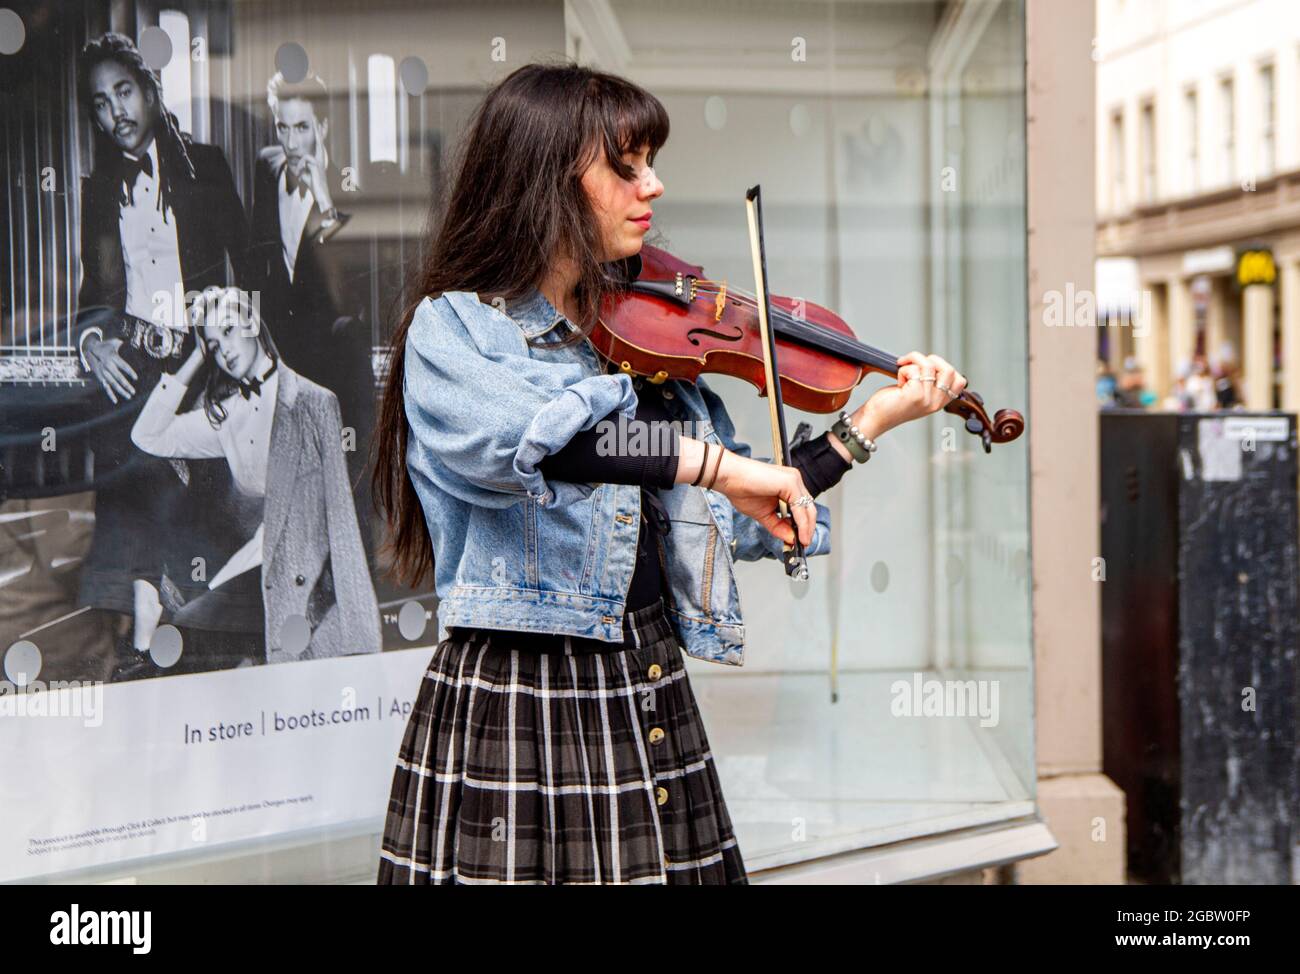 Dundee, Tayside, Scotland, UK. 5th Aug, 2021. UK Weather: A bright and windy day with sunny spells across North East Scotland with temperatures reaching 20°C. A young female violinist playing classical music whilst busking in the wind outside Boots the Chemist in Dundee city centre. Credit: Dundee Photographics/Alamy Live News Stock Photo